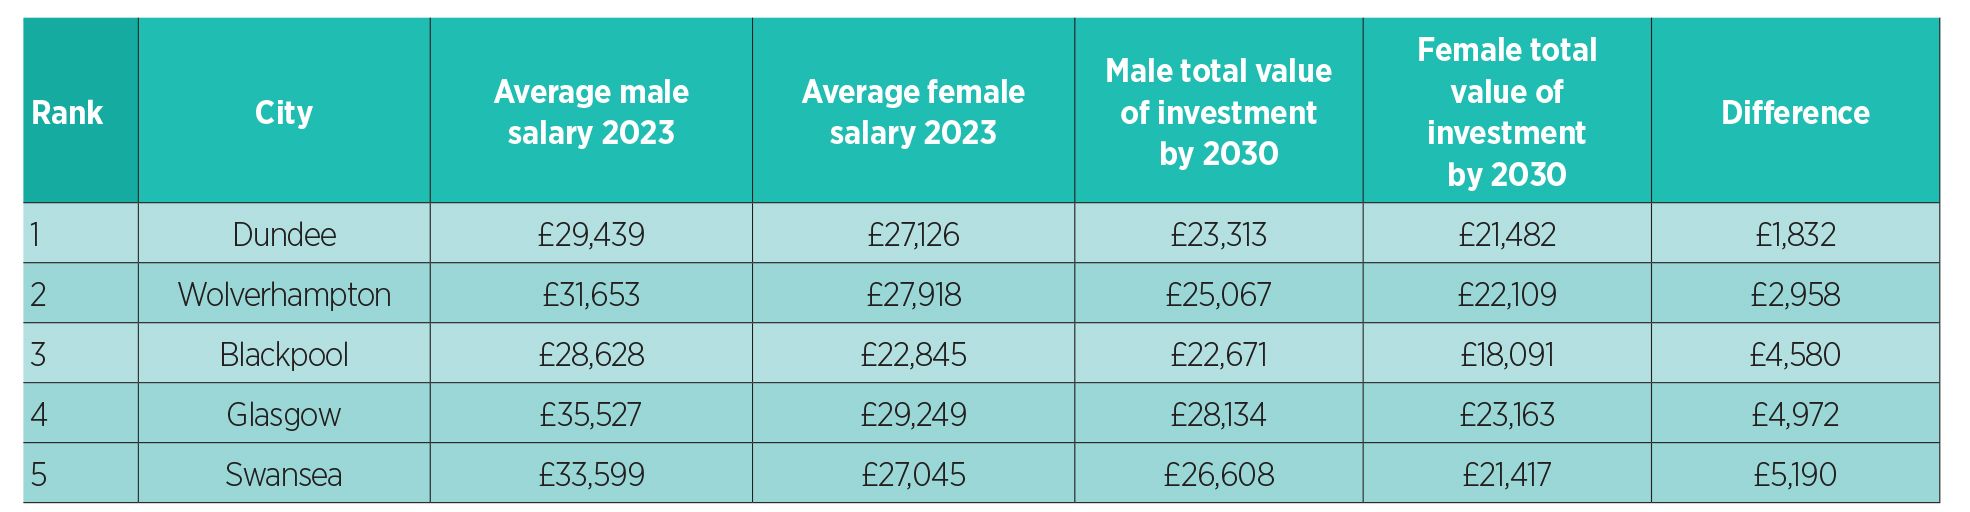 UK cities with the smallest gender investment gap in 2023